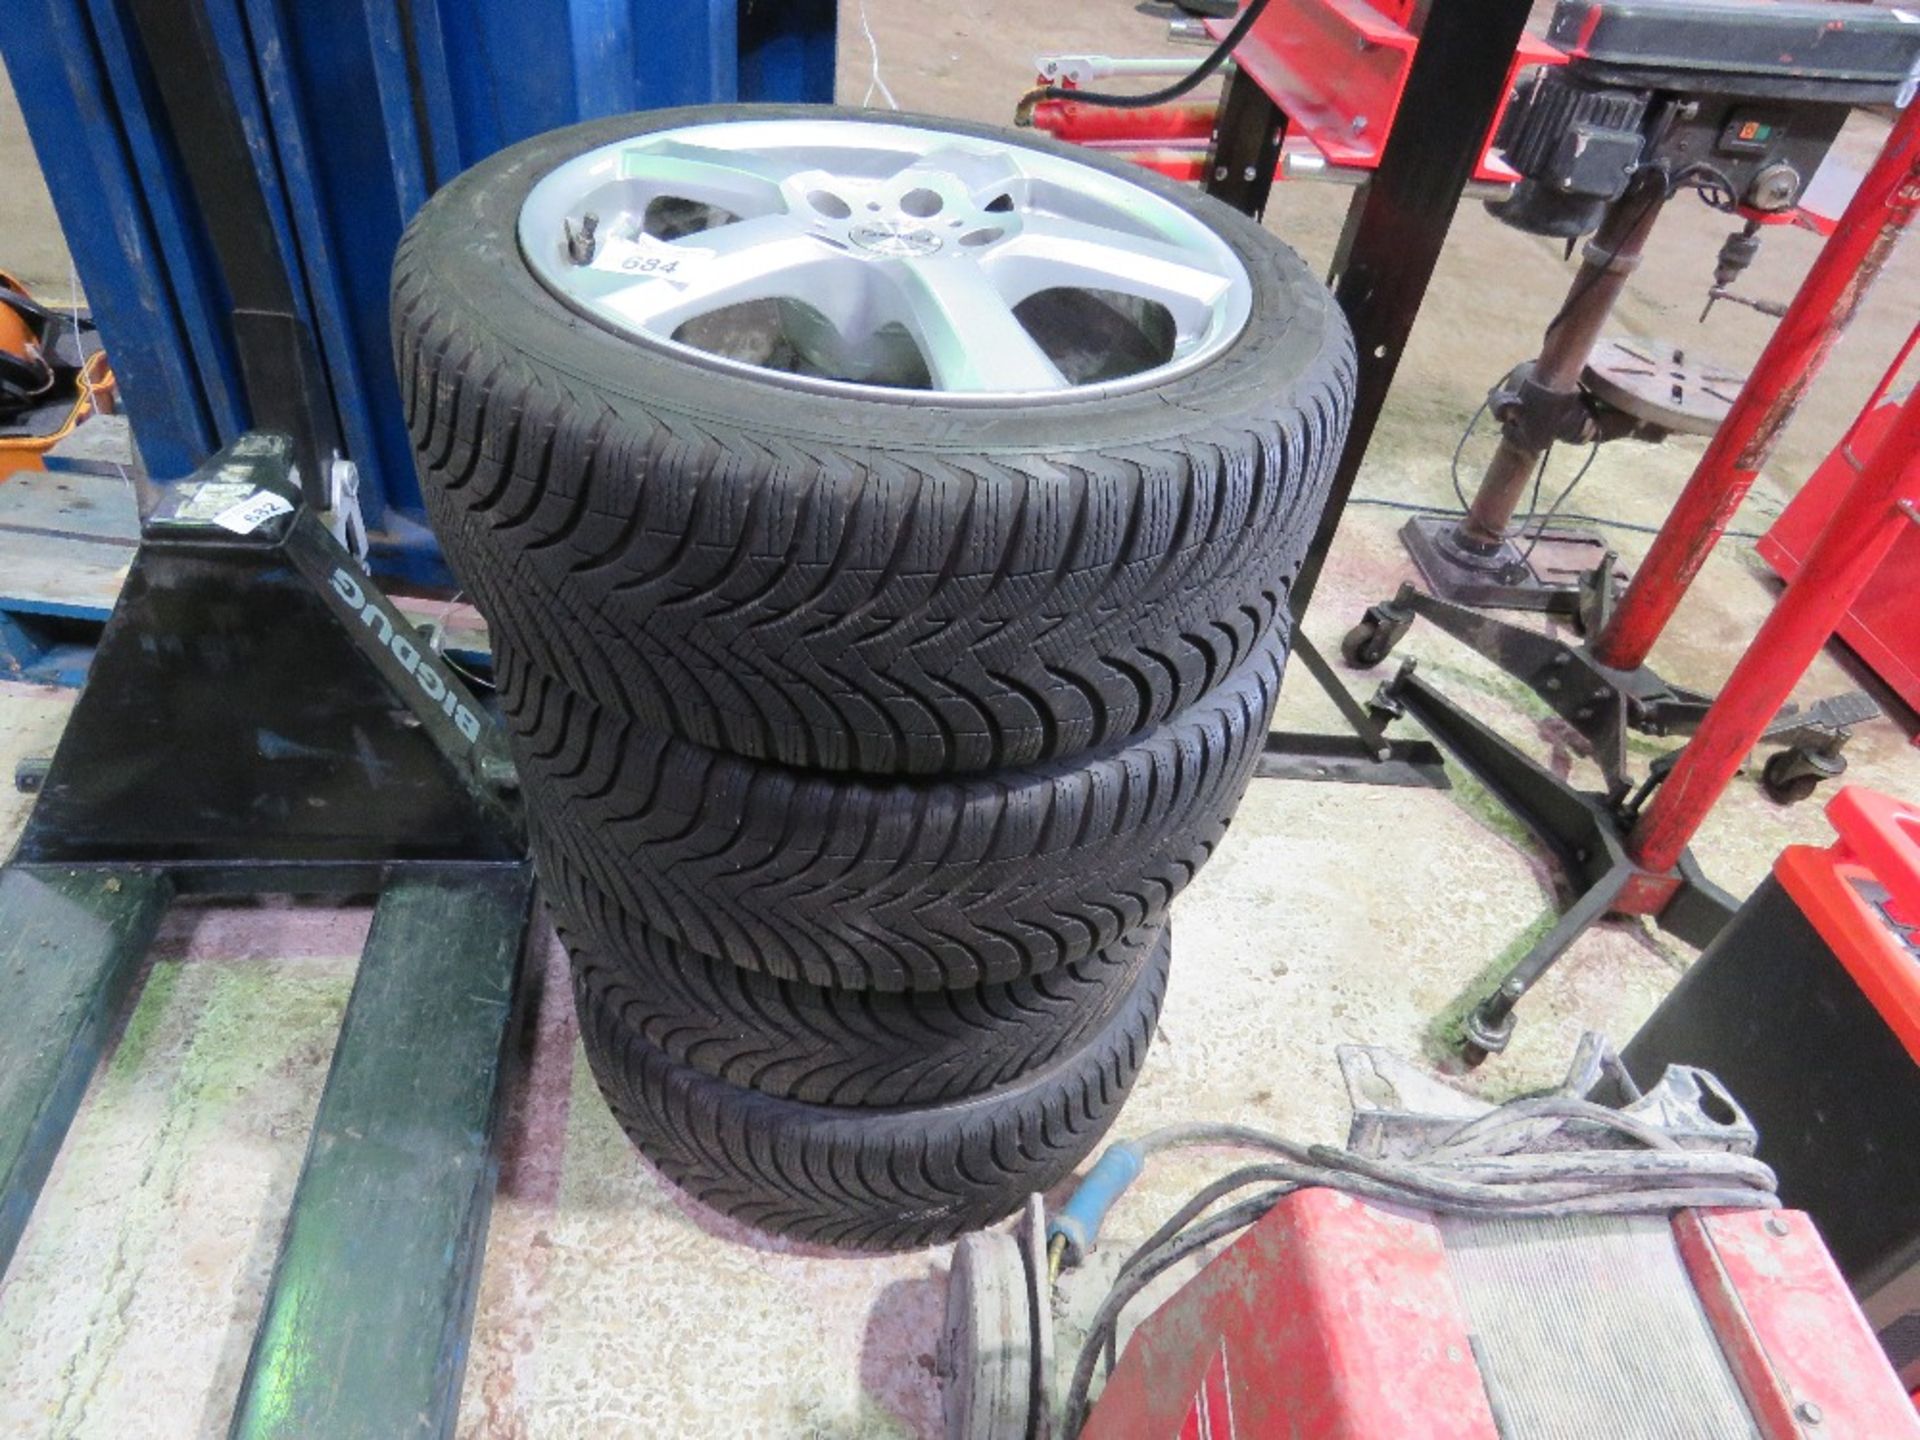 SET OF 4NO ENZO 225-45/17 ALLOY WHEELS AND TYRES, SNOW / WINTER TYRES FITTED.